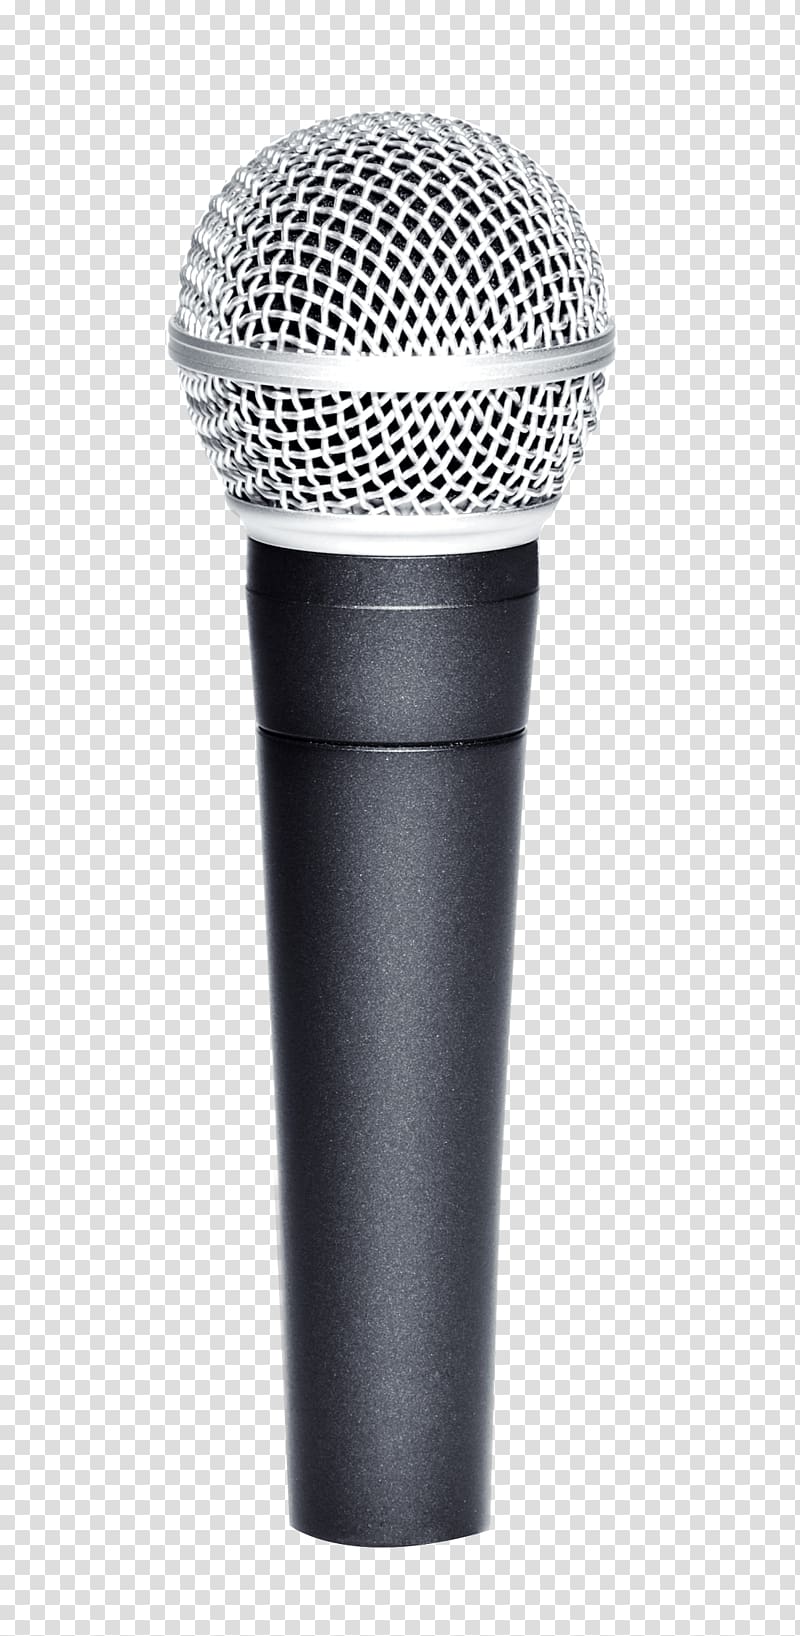 black and gray wireless microphone, Microphone transparent background PNG clipart